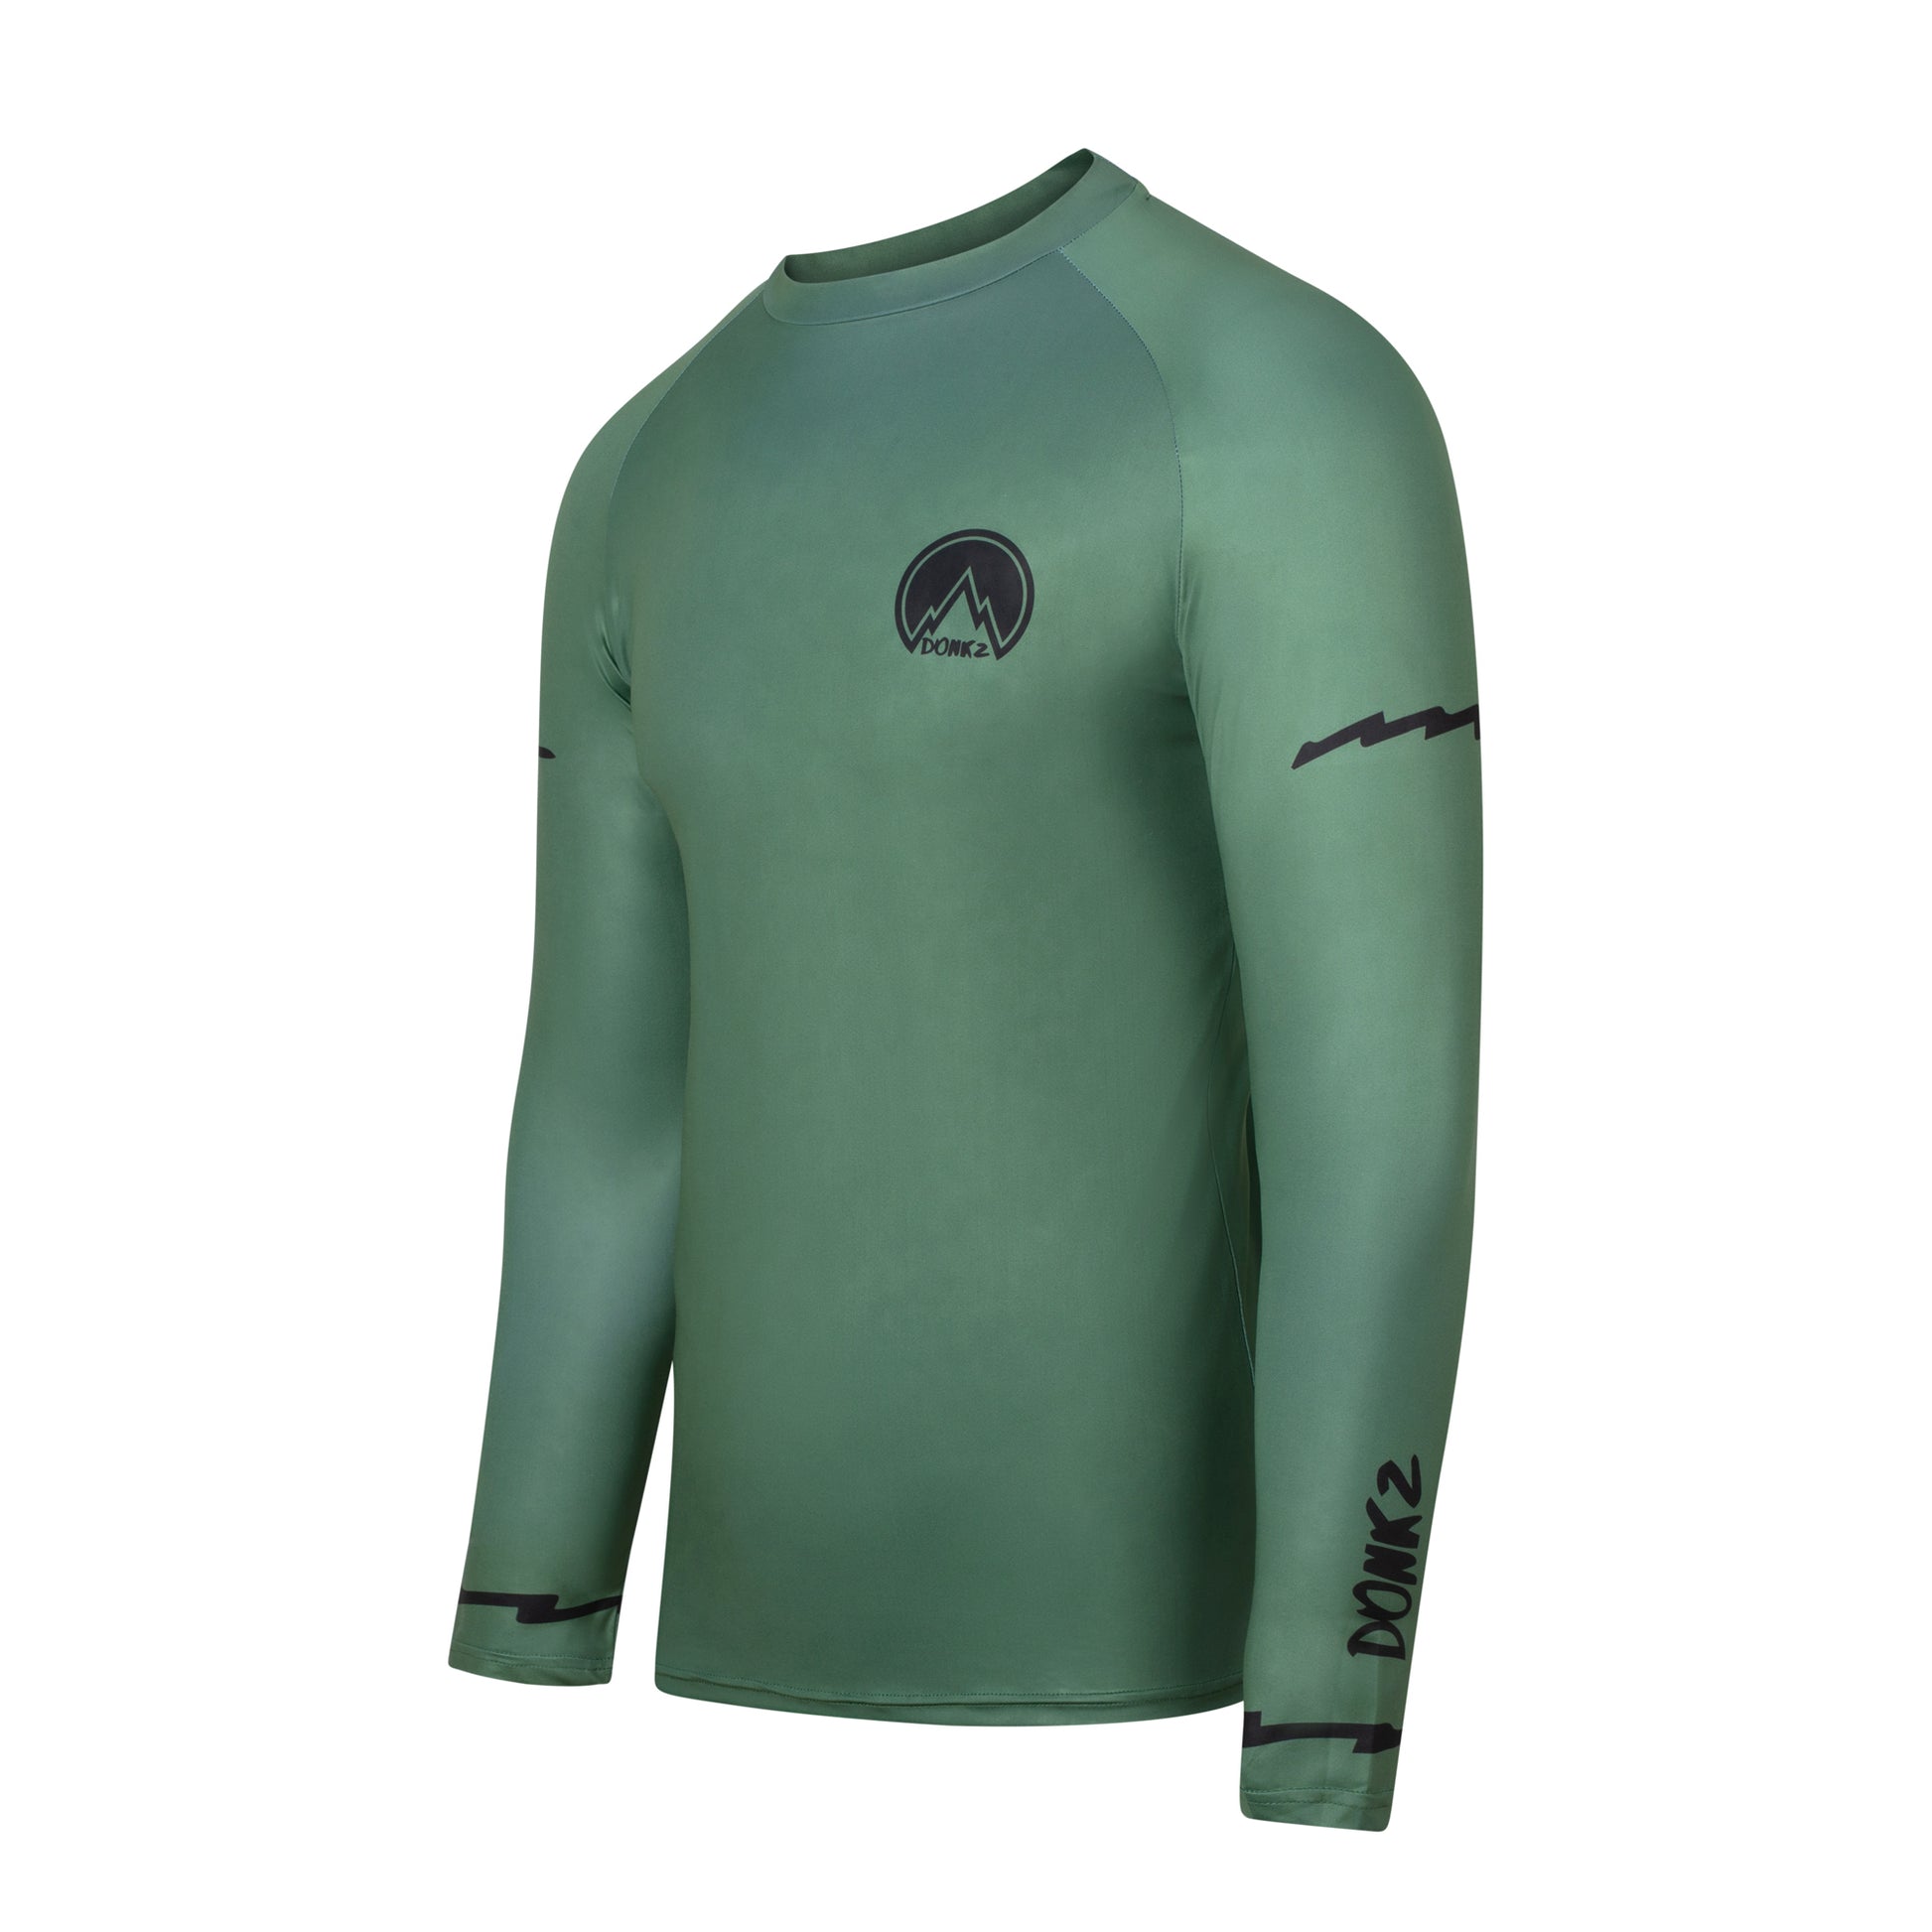 Khaki green Donkz compression top with black detailing